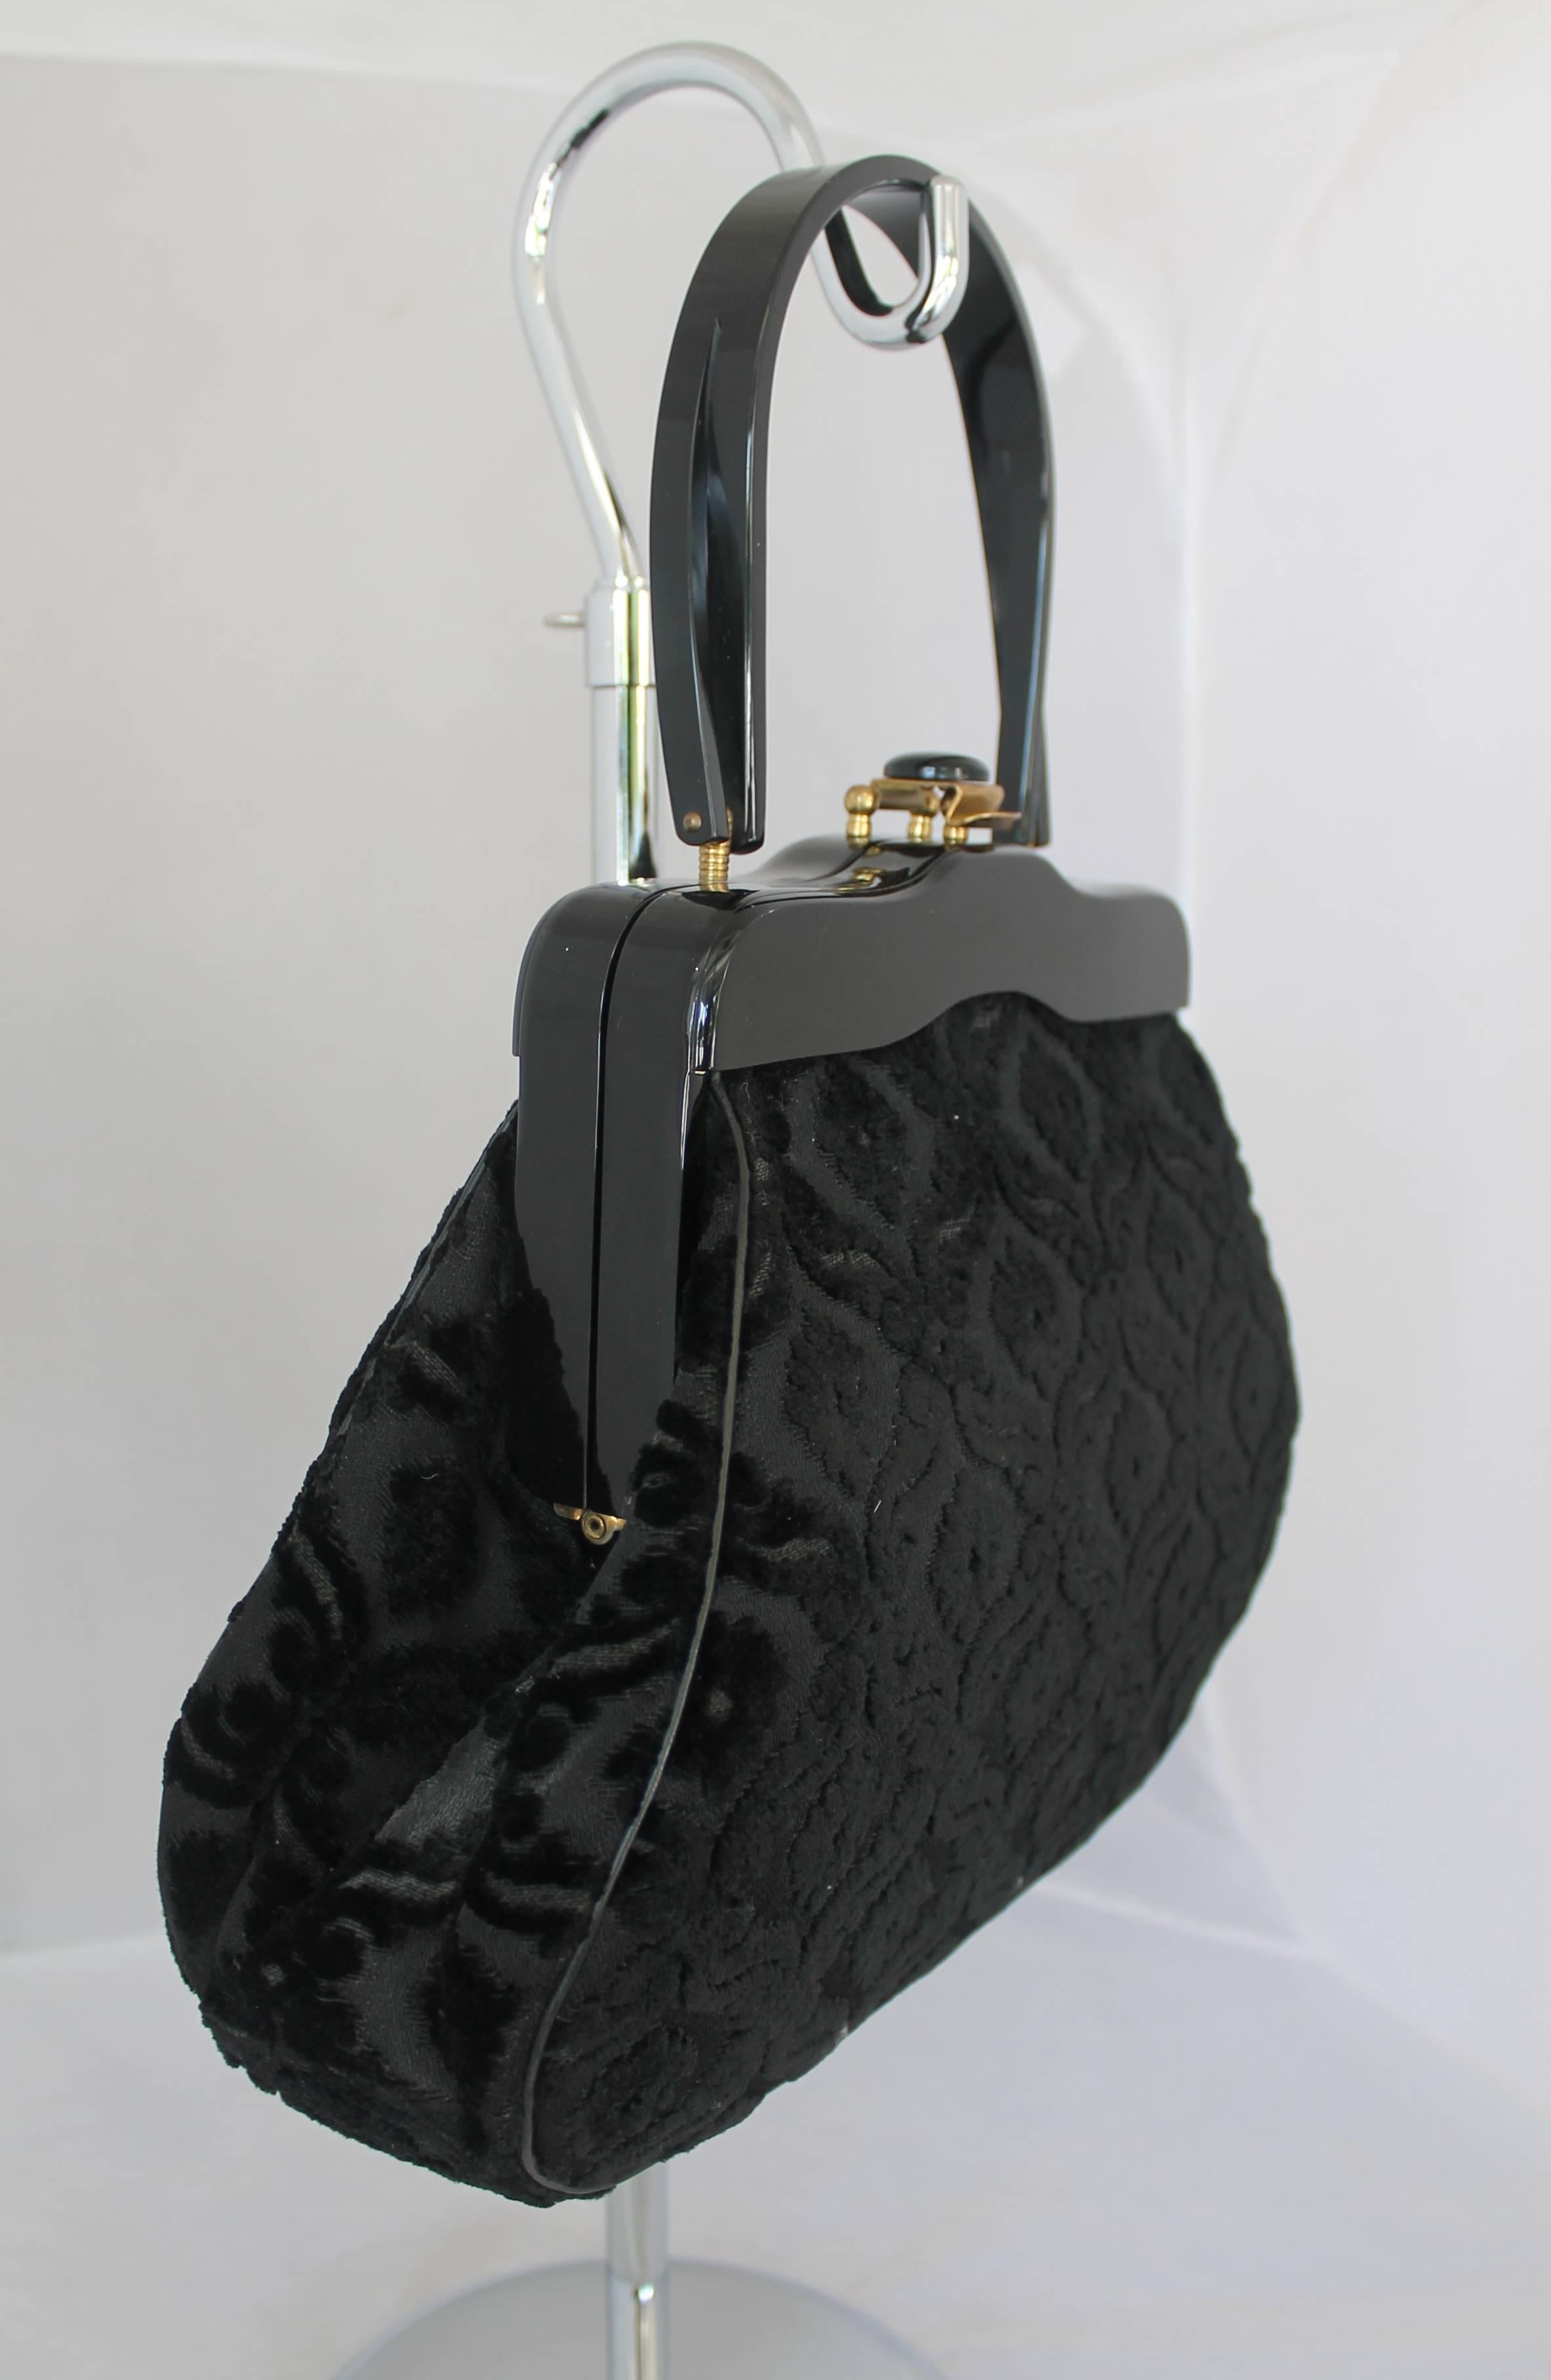 1950's Rialto Vintage Black Handbag w/ Cut Velvet Design & Black Lucite Handle. This bag is in very good vintage condition. It has black satin lining. However it has a very minor scratch on the Lucite top handle.

Measurements:
Height: